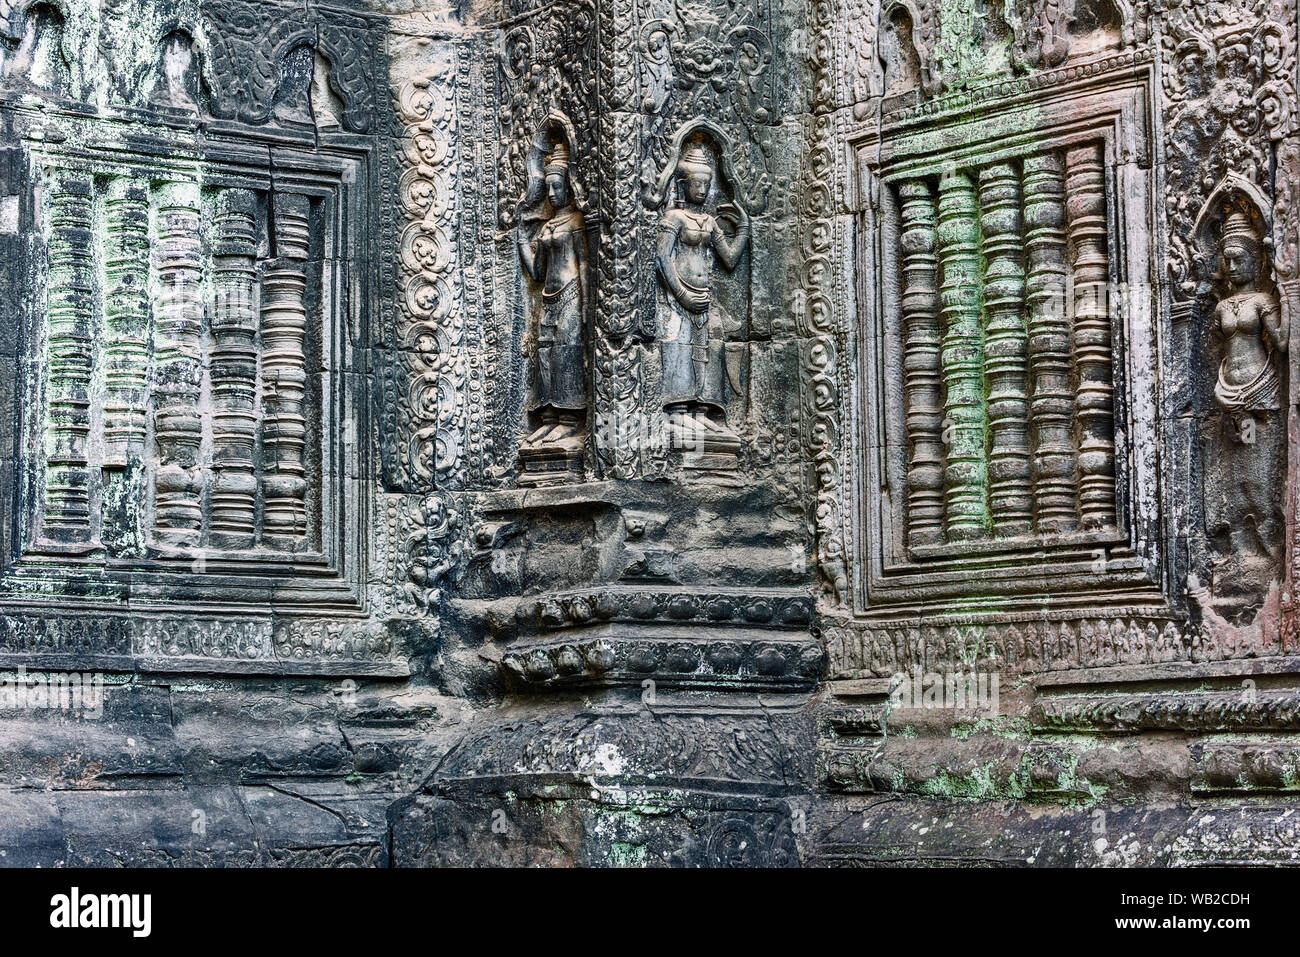 Carved sandstone bas-relief Apsaras (celestial maidens) and carved stone window bars at Ta Prohm. Siem Reap, Cambodia. Stock Photo